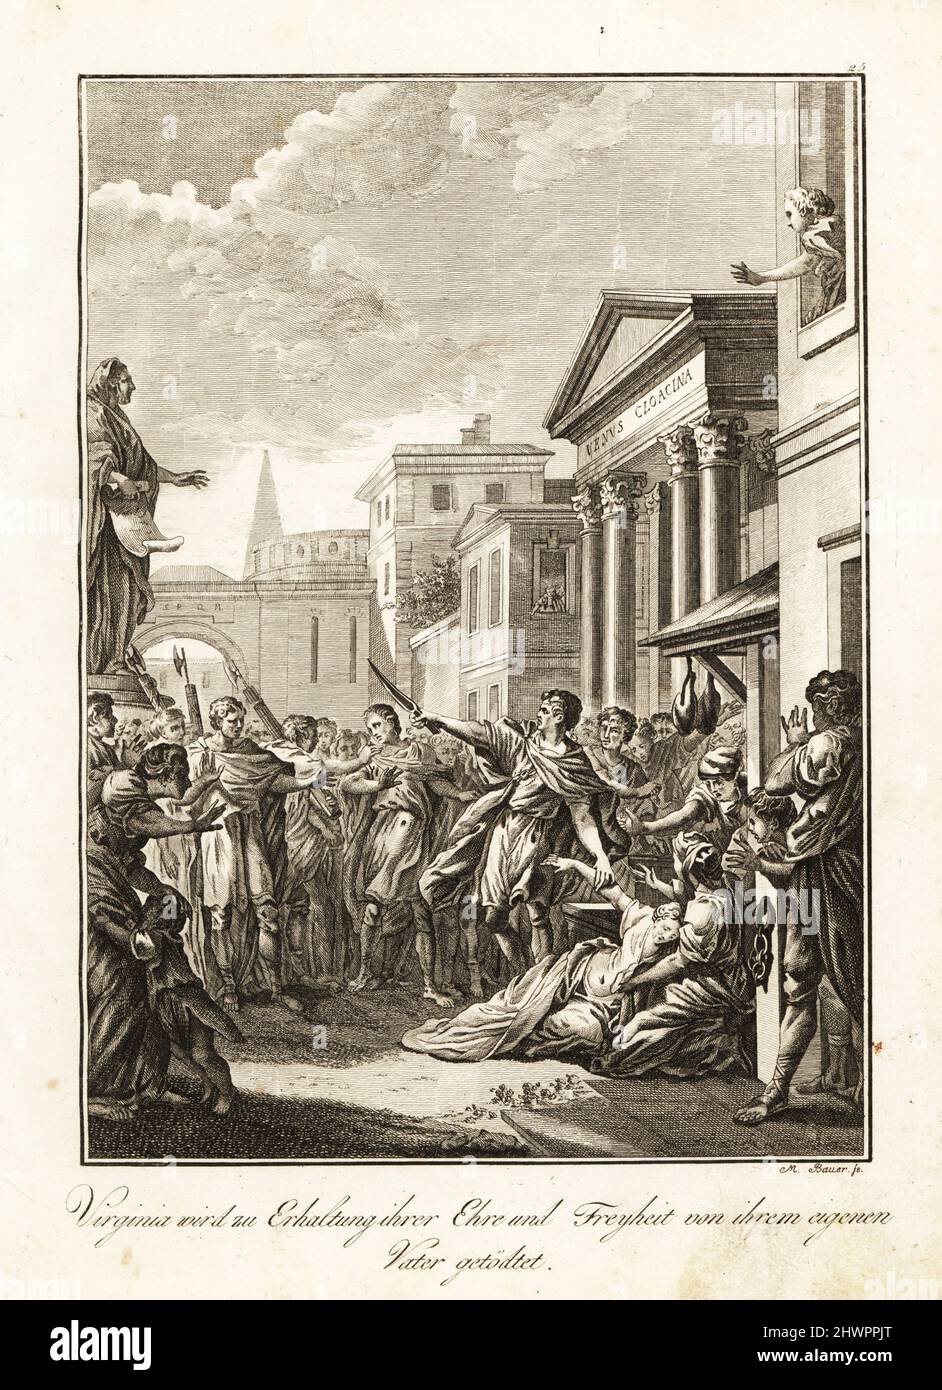 Verginia stabbed to death by her son Verginius to save her from the lustful Roman senator Appius Claudius at the Shrine of Venus Cloacina, 449 BC. Virginie tuee par son pere pour la preserver d'Appius. Copperplate engraving by M. Bauer after a design by Hubert-François Gravelot from Professor Joseph Rudolf Zappe’s Gemalde aus der romischen Geschichte, Pictures of Roman History, Joseph Schalbacher, Vienna, 1800. German edition of Abbe Claude Francois Xavier Millot’s Abrege de l’Histoire Romaine. Stock Photo